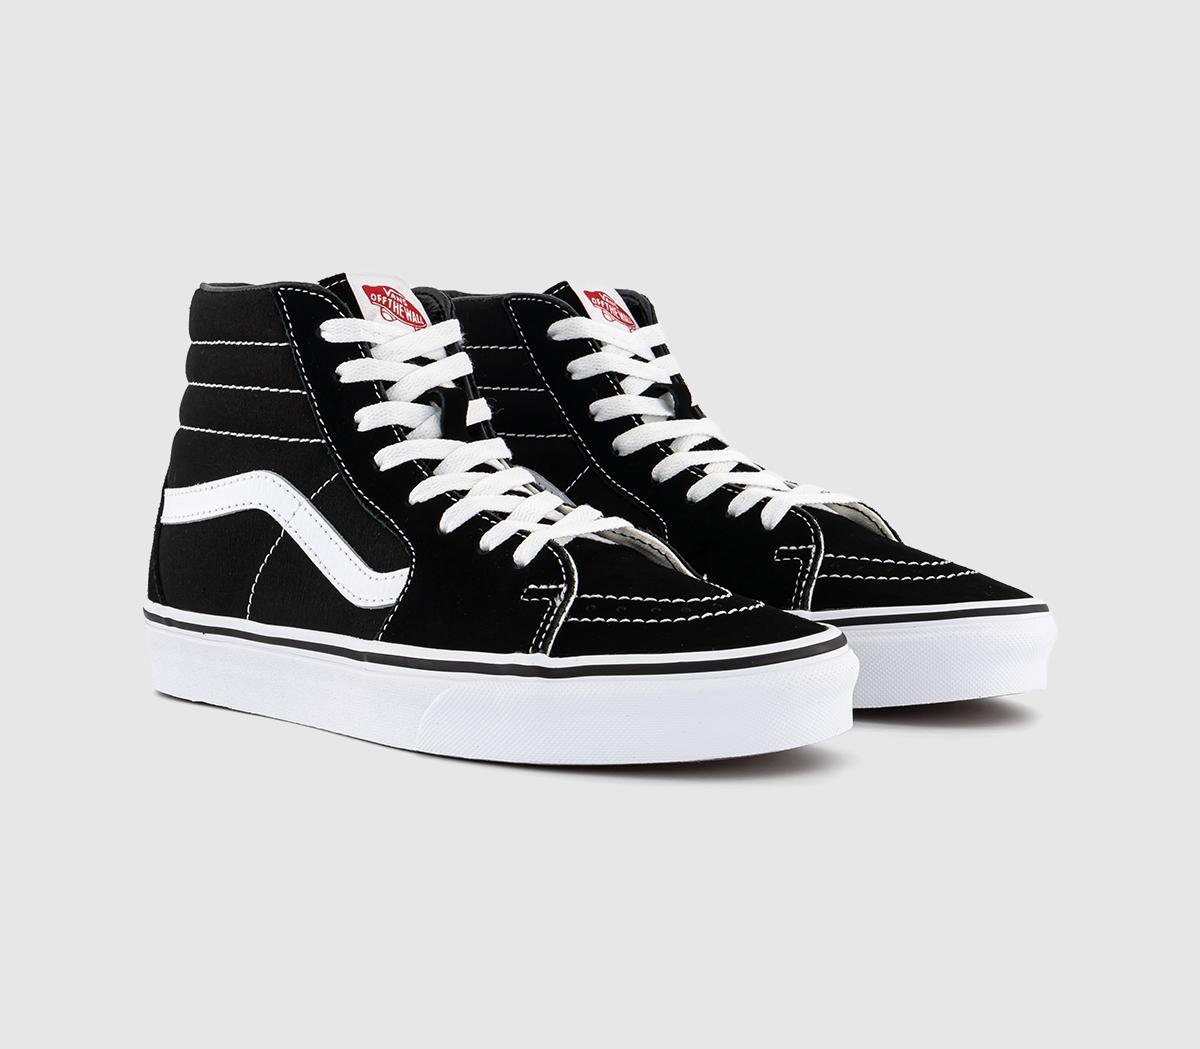 Vans Womens Sk8 Hi Canvas Trainers In Black And White, 5